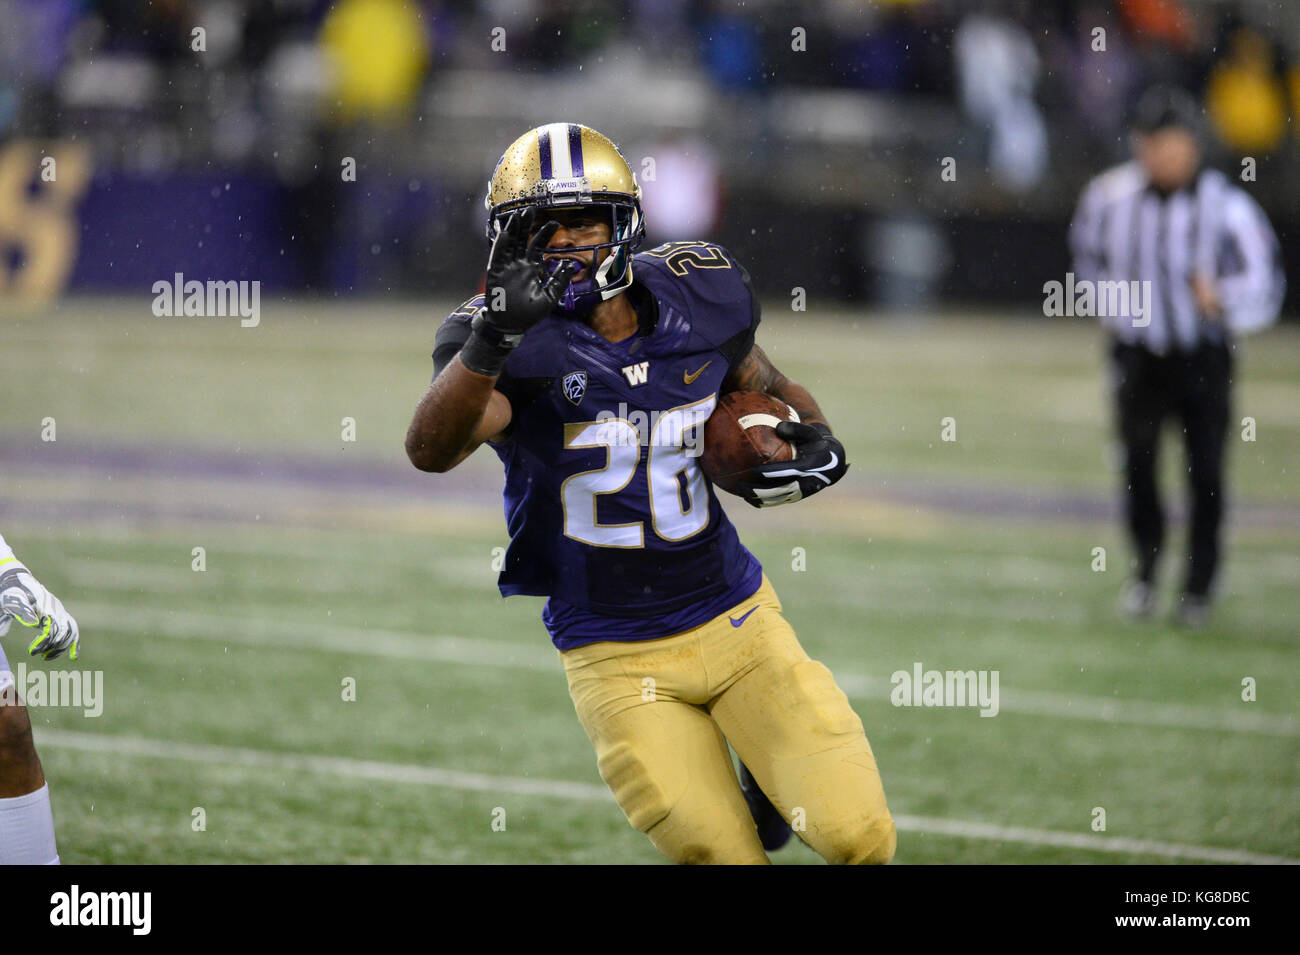 Seattle, WA, USA. 4th Nov, 2017. UW tailback Salvon Ahmed (26) in action during a PAC12 football game between the Oregon Ducks and the Washington Huskies. The game was played at Husky Stadium on the University of Washington campus in Seattle, WA. Jeff Halstead/CSM/Alamy Live News Stock Photo